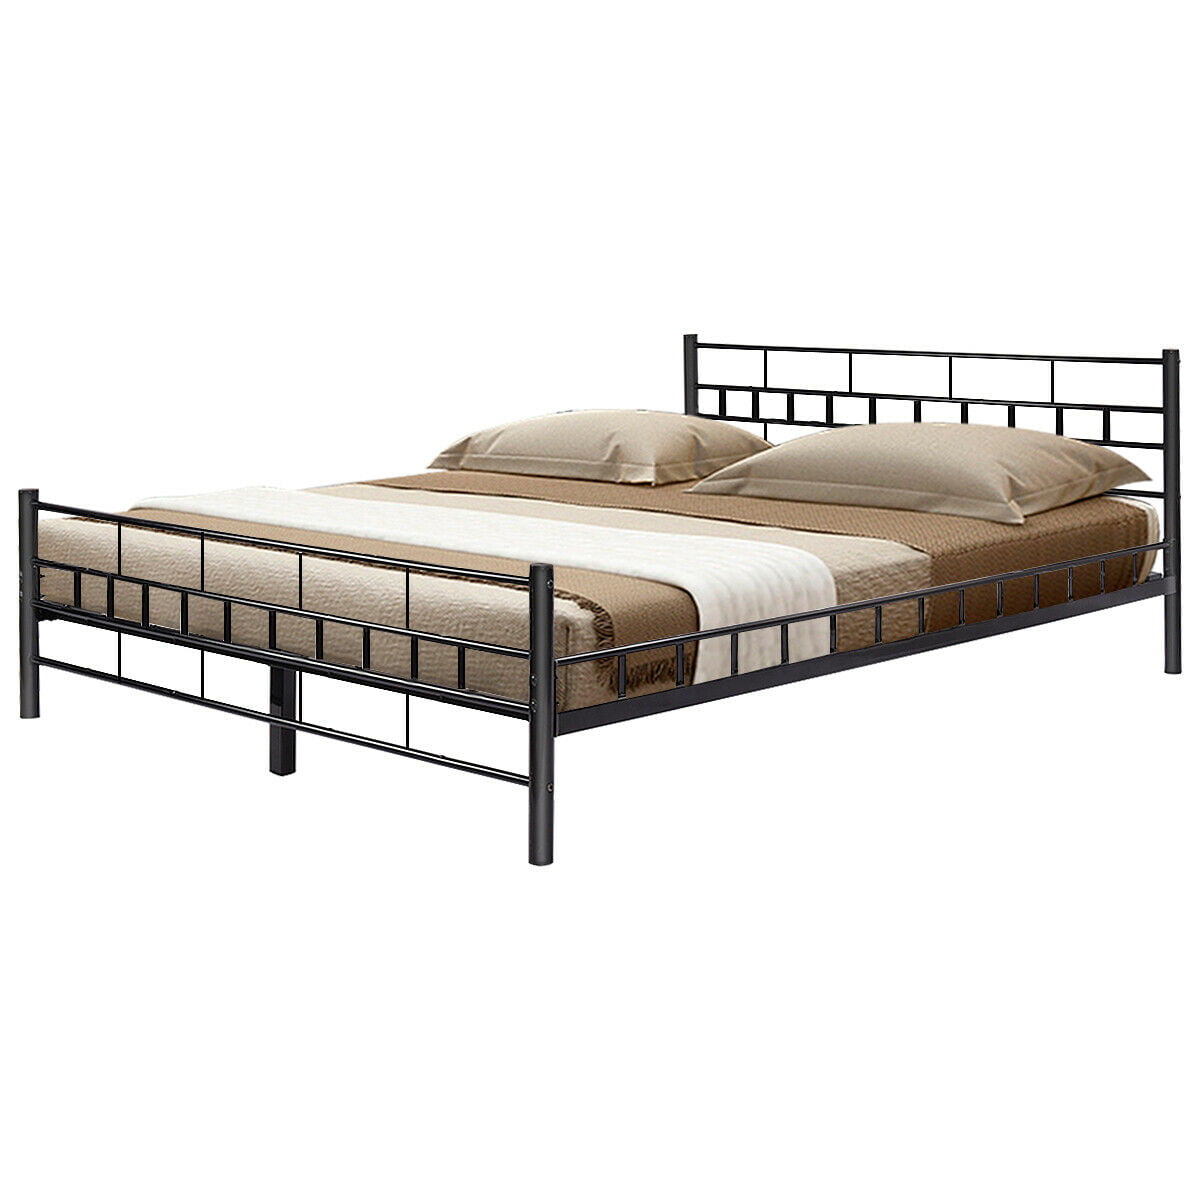 Queen Size Wood Slats Bed Frame, Metal Bed Frame With Wooden Slats Queen